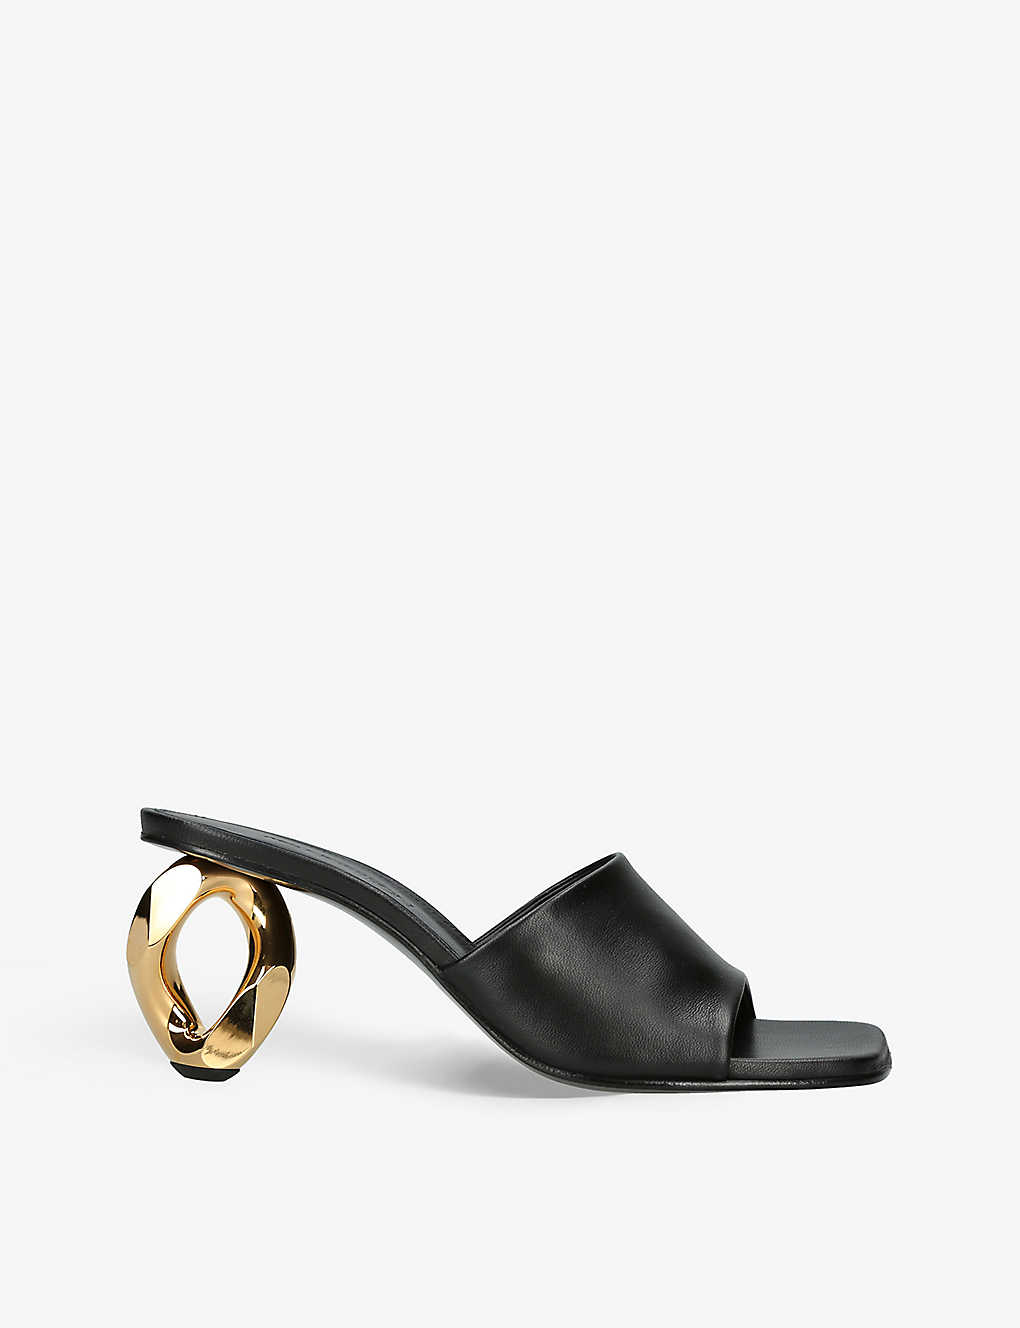 Shop Jw Anderson Women's Black Chain Leather Heeled Mules